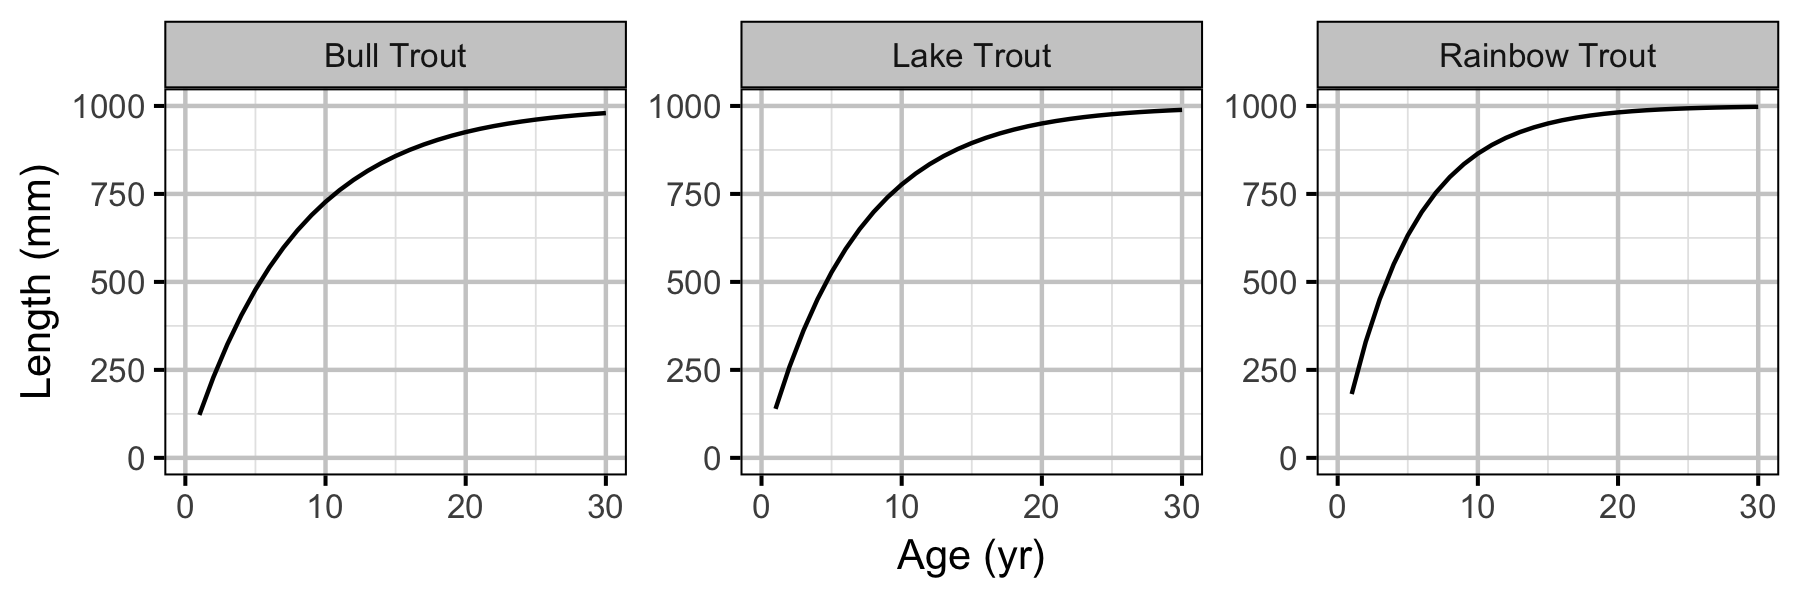 figures/yield/length_age.png